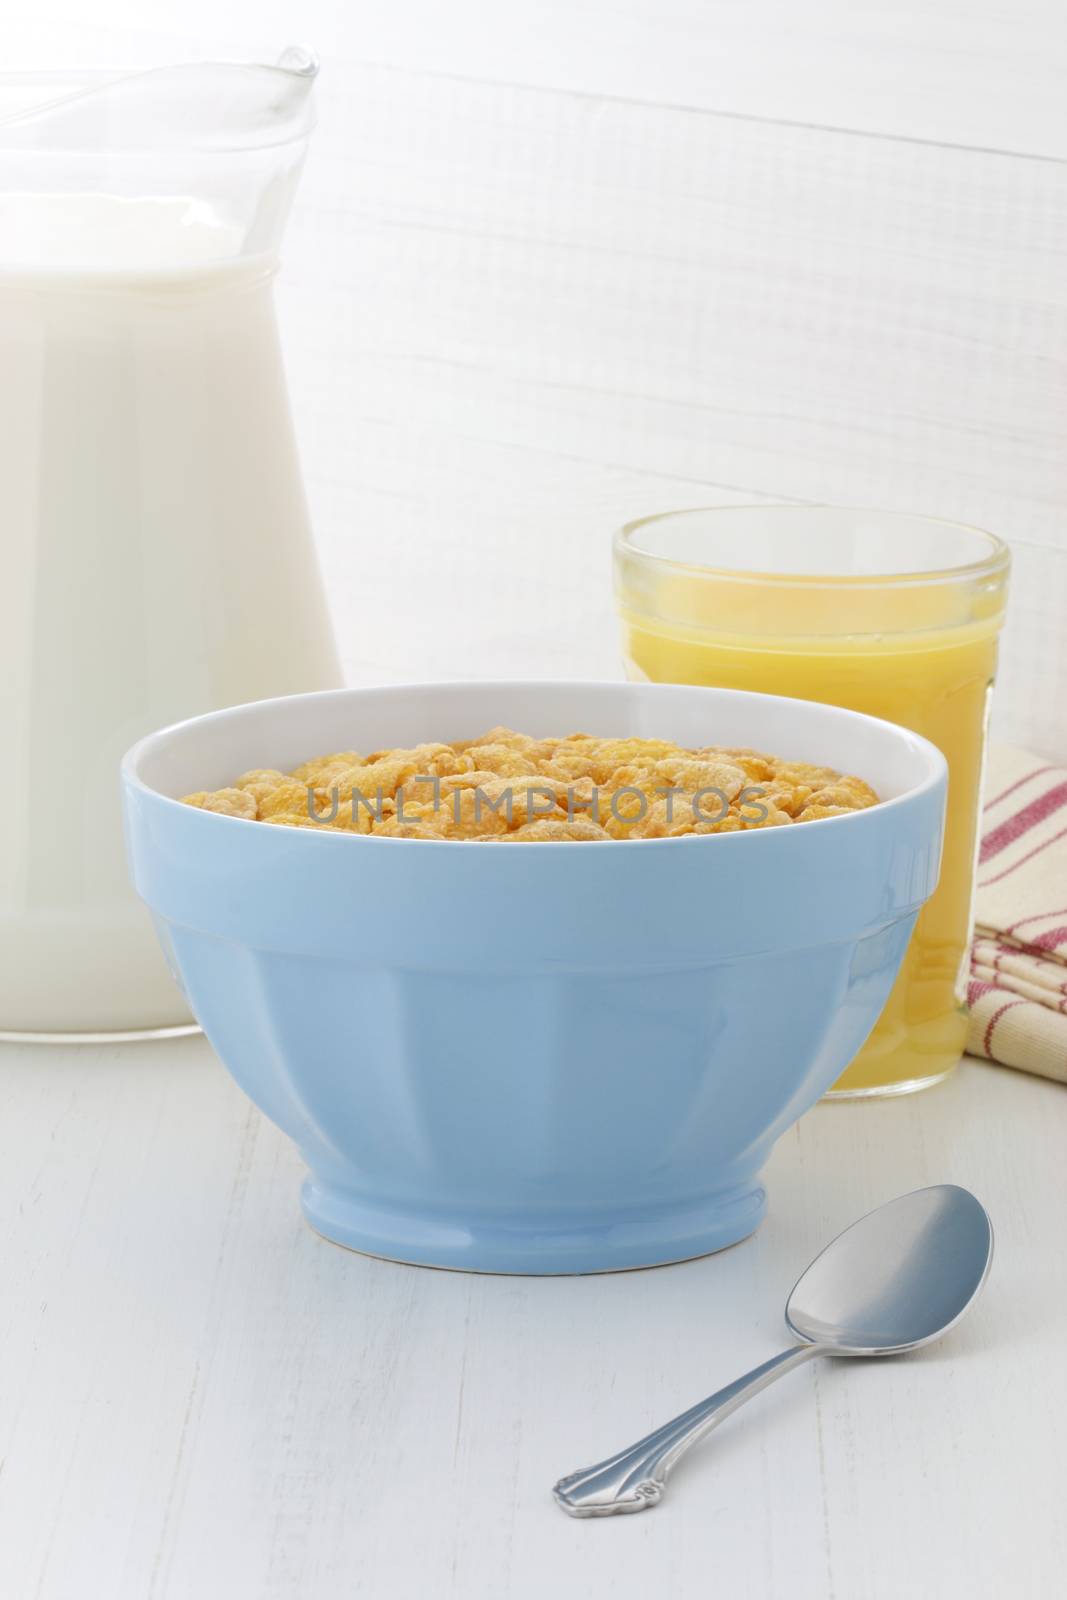 delicious and healthy corn flakes, with fresh milk and orange juice